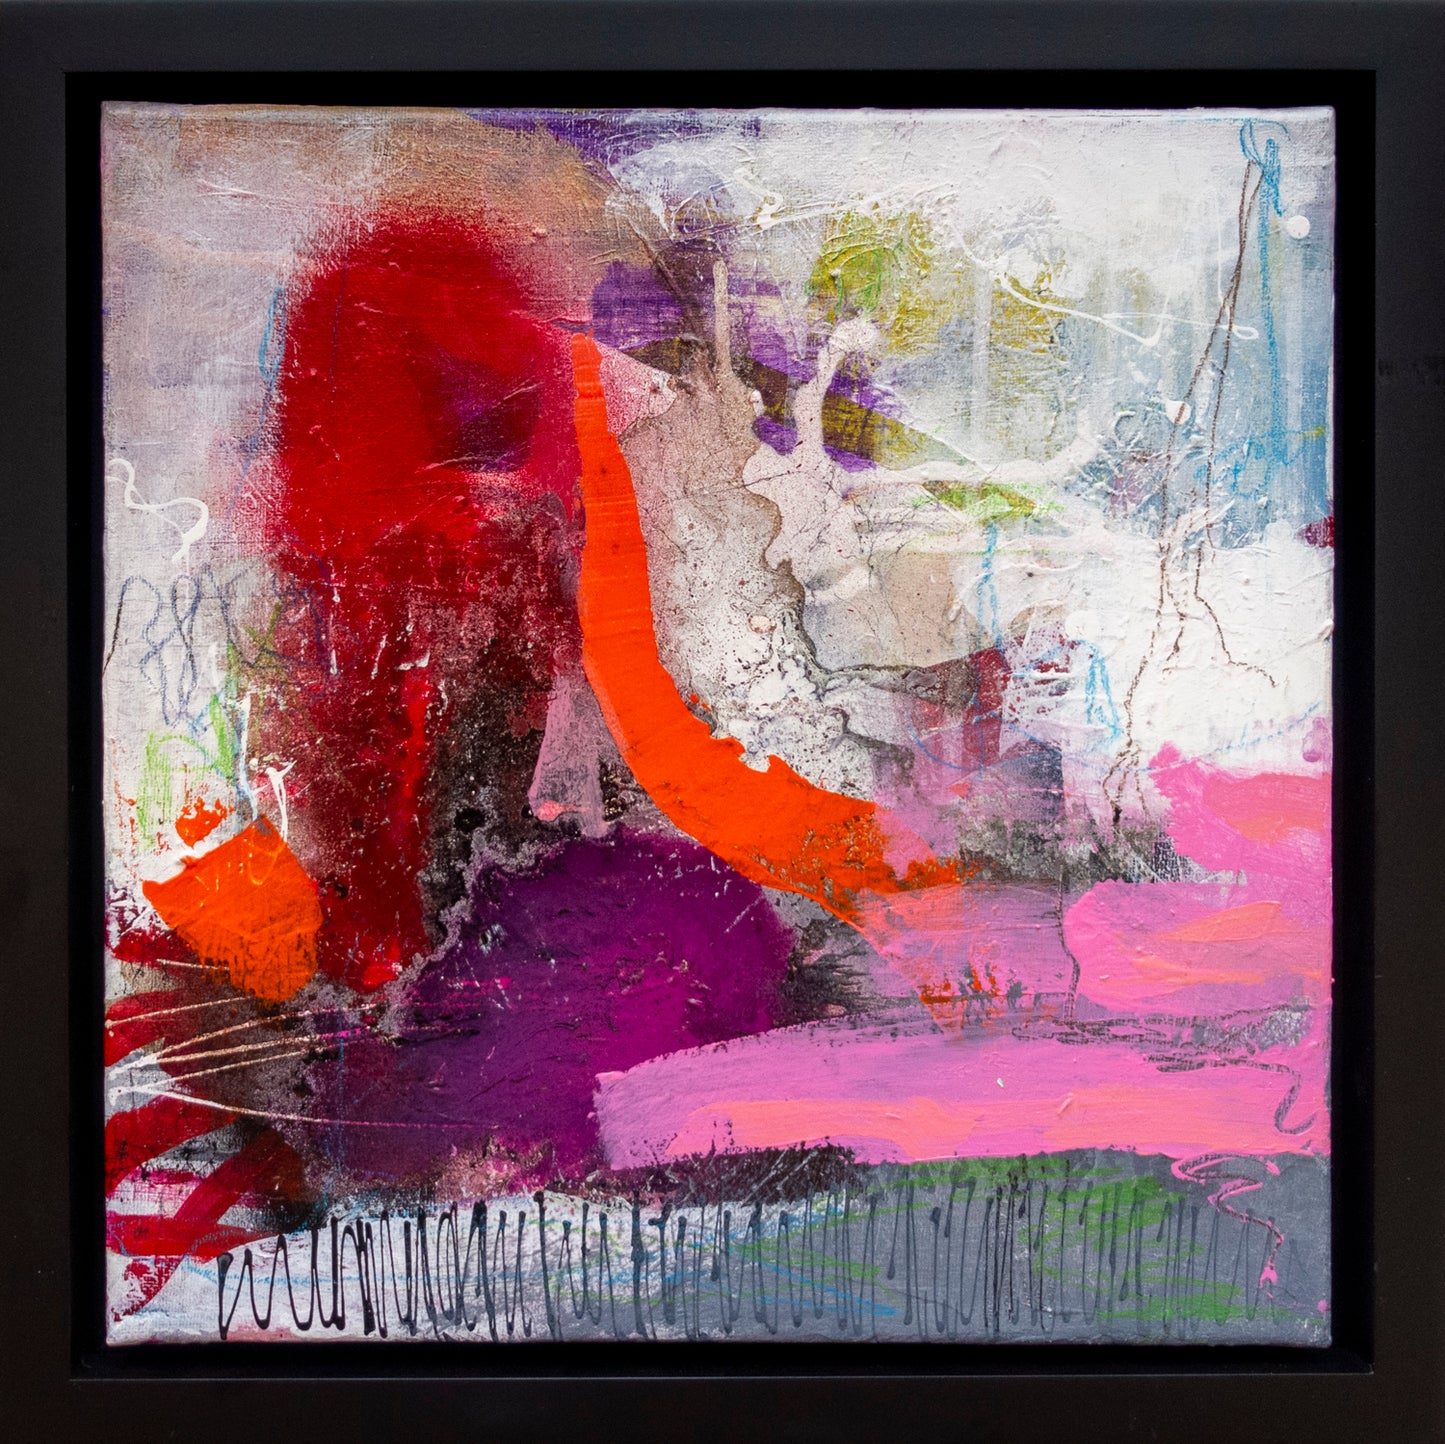 Colorful abstract painting using acrylic paint titled 'Break Free I' by artist Steffi Möllers; canvas measures 12"x12"; with black wood frame measures 13"x13"